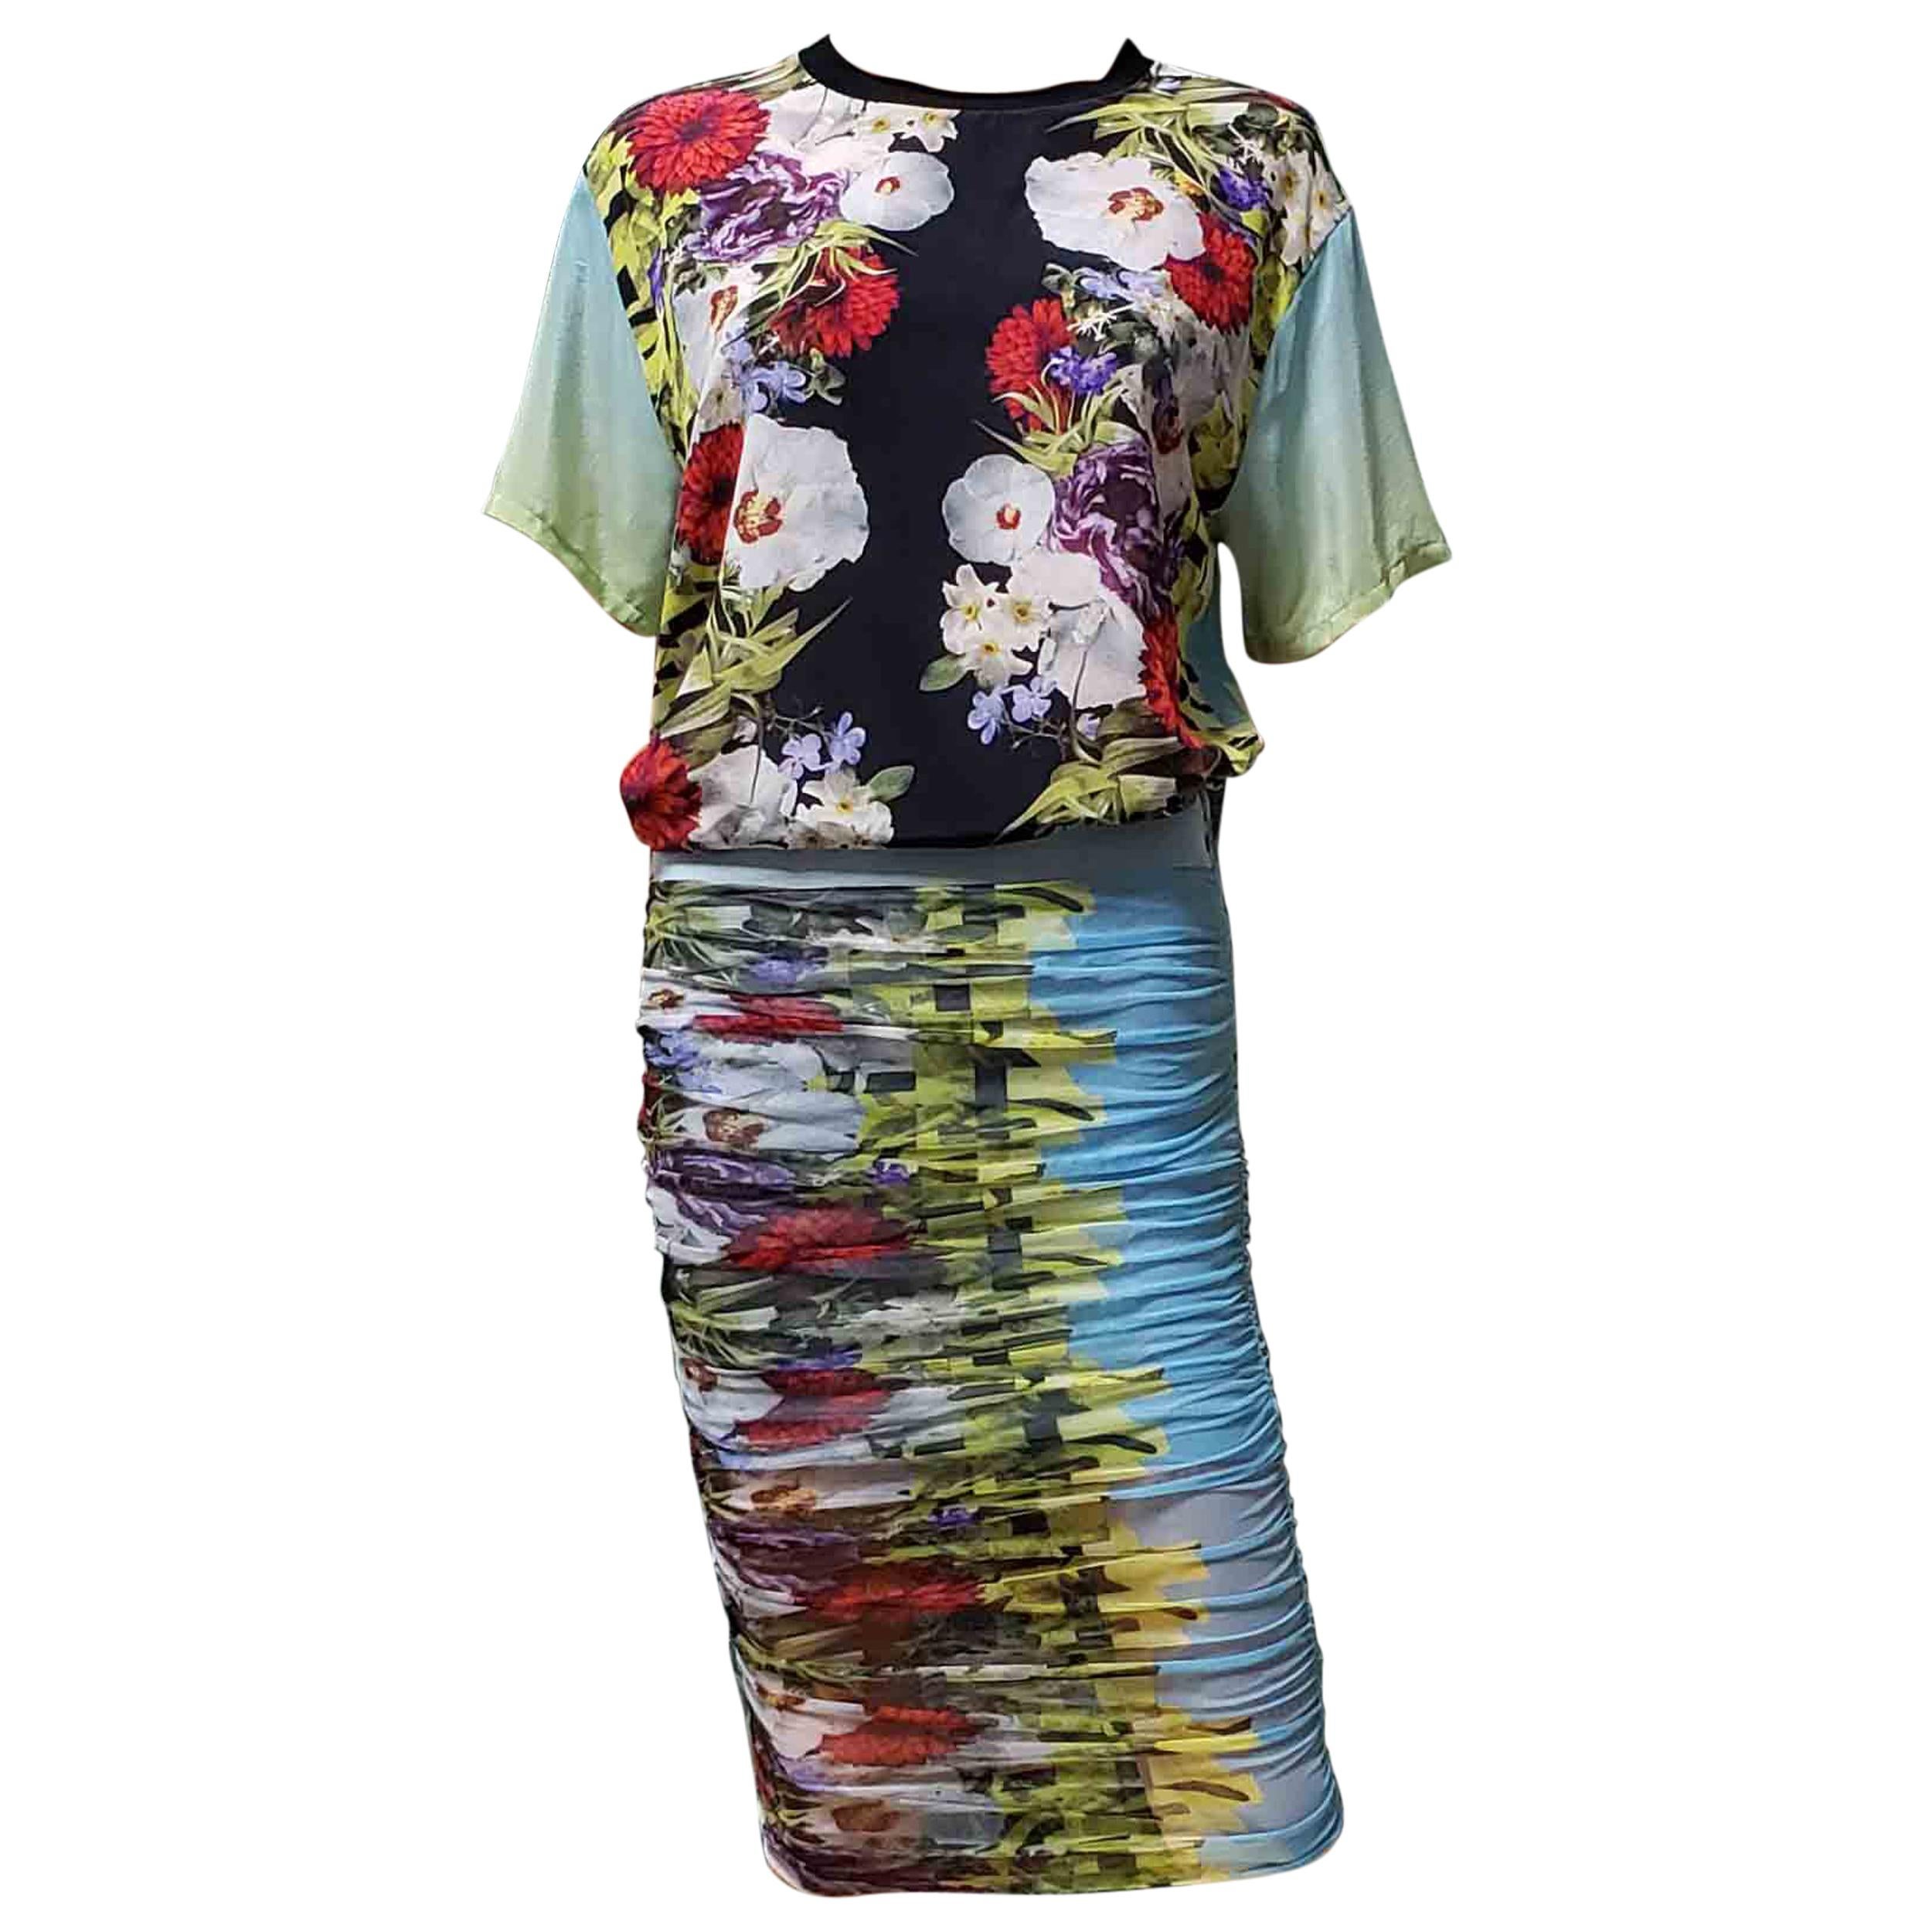 SS 2014 l# 28 VERSACE FLORAL SILK PRINTED STRETCH MESH SKIRT DRESS-Y SUIT 38 For Sale